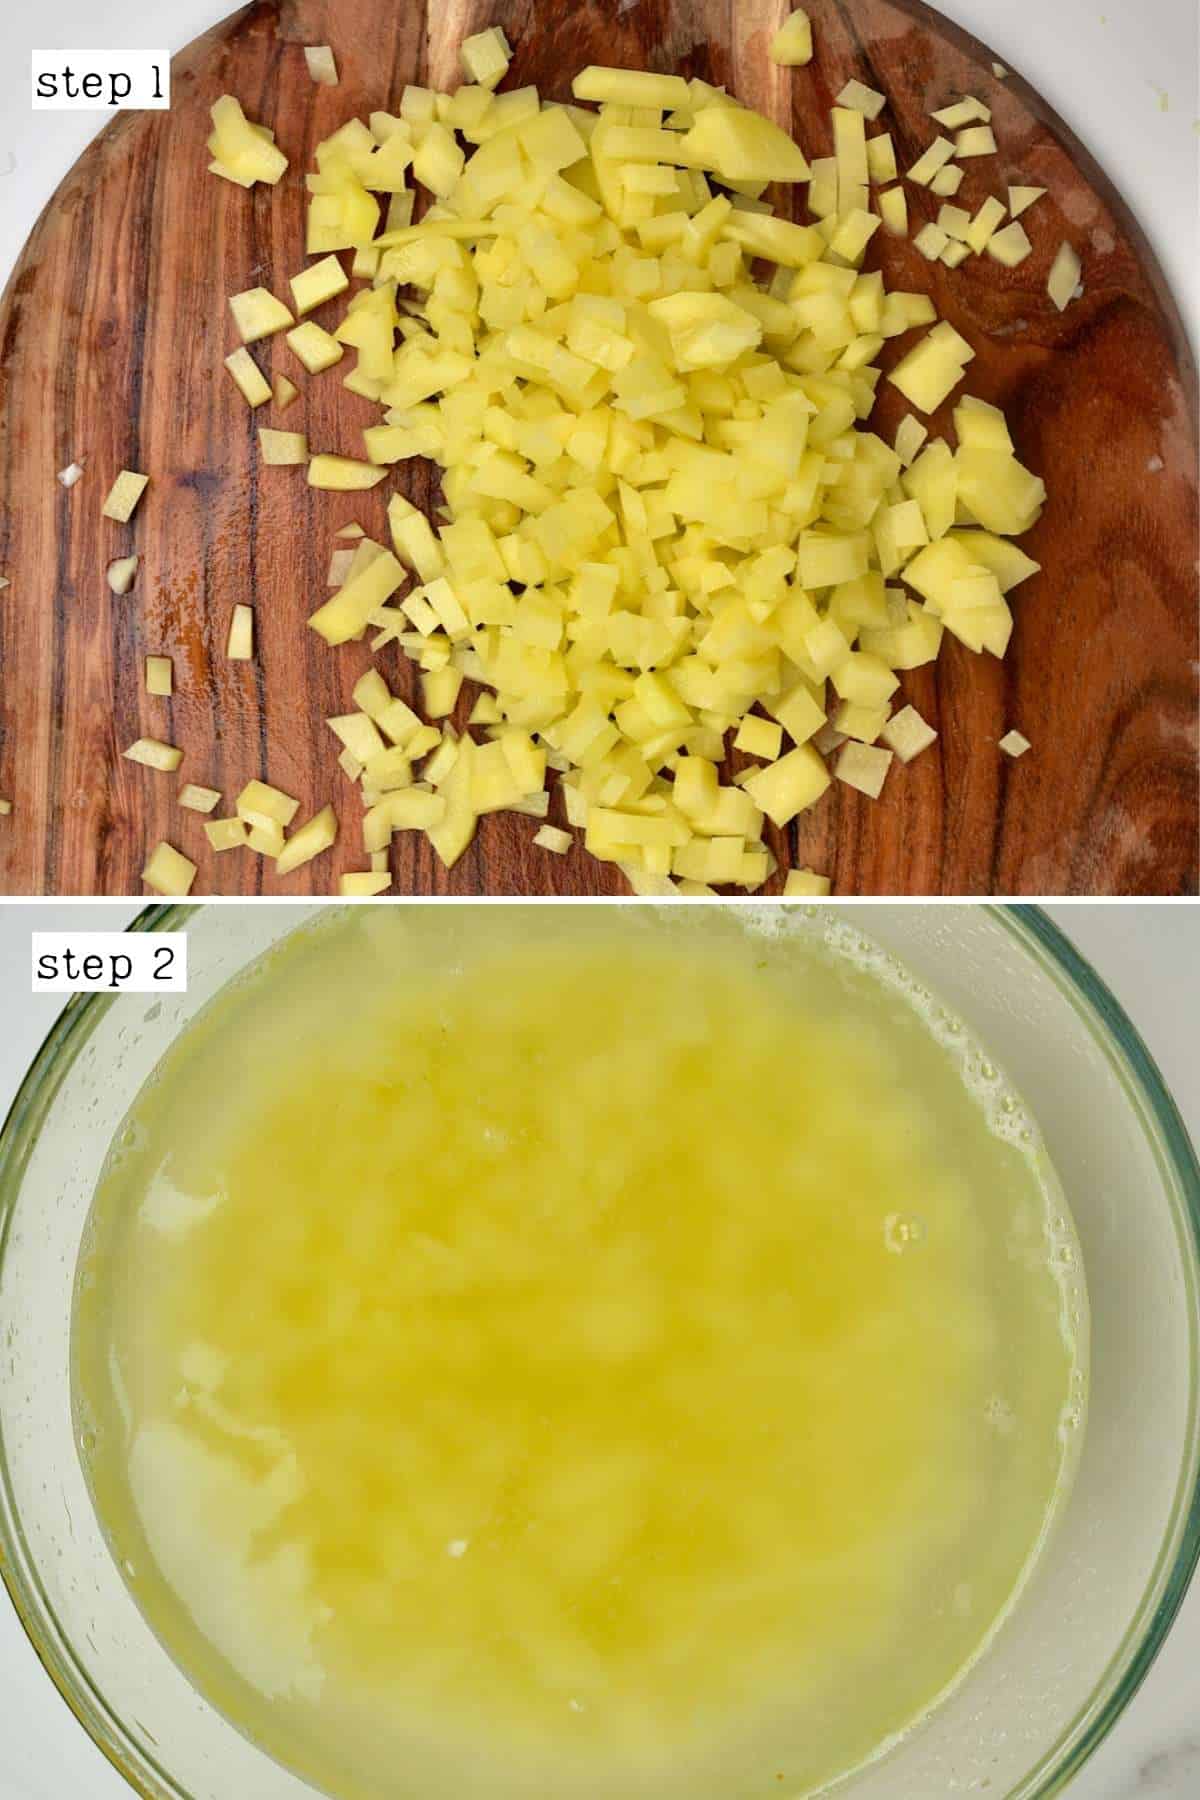 Steps for chopping potatoes